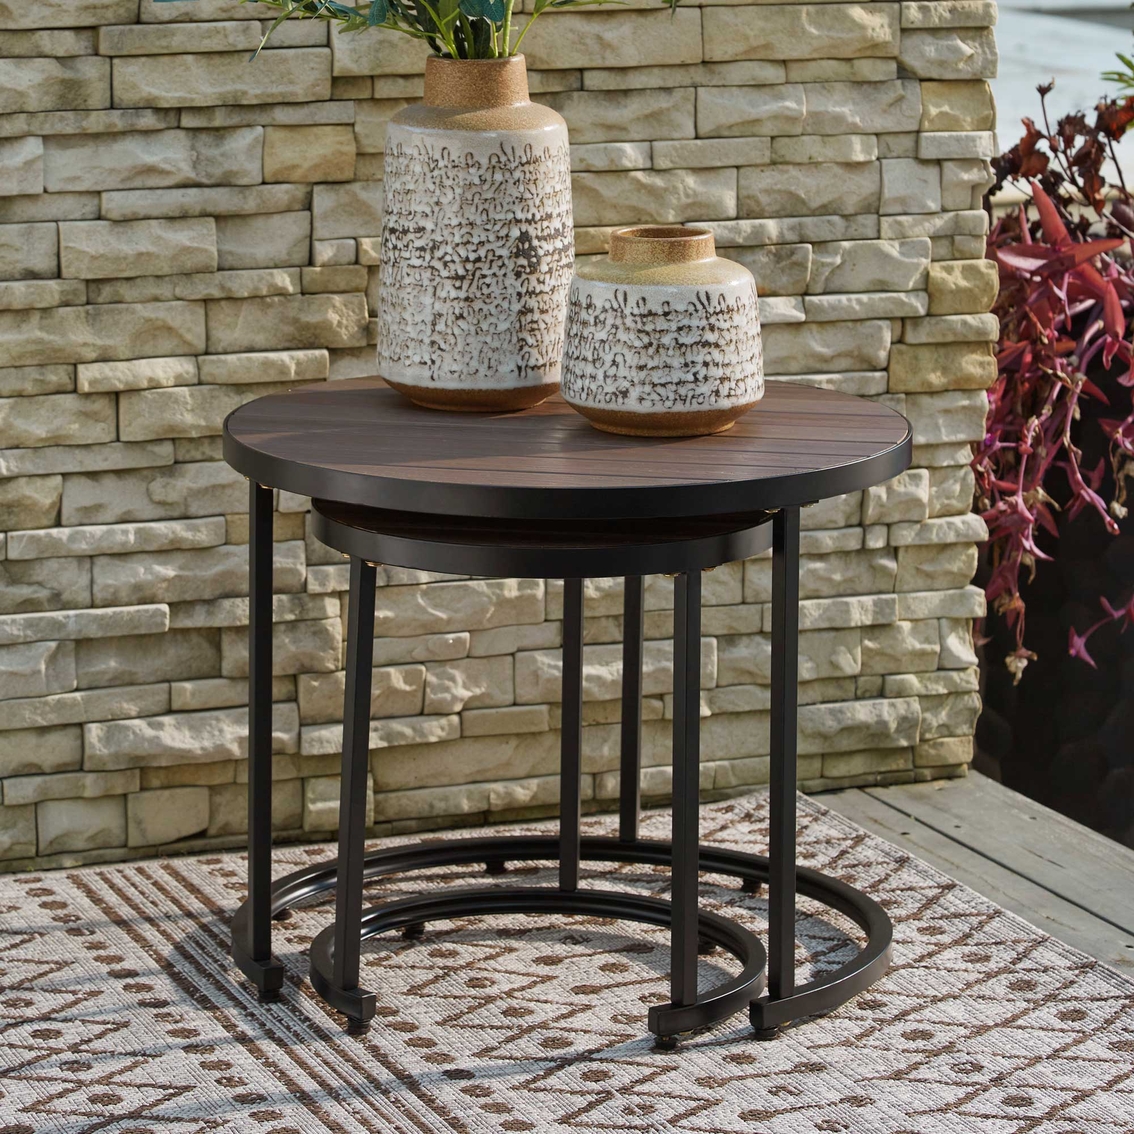 Signature Design by Ashley Ayla Outdoor Nesting End Tables - Image 4 of 6